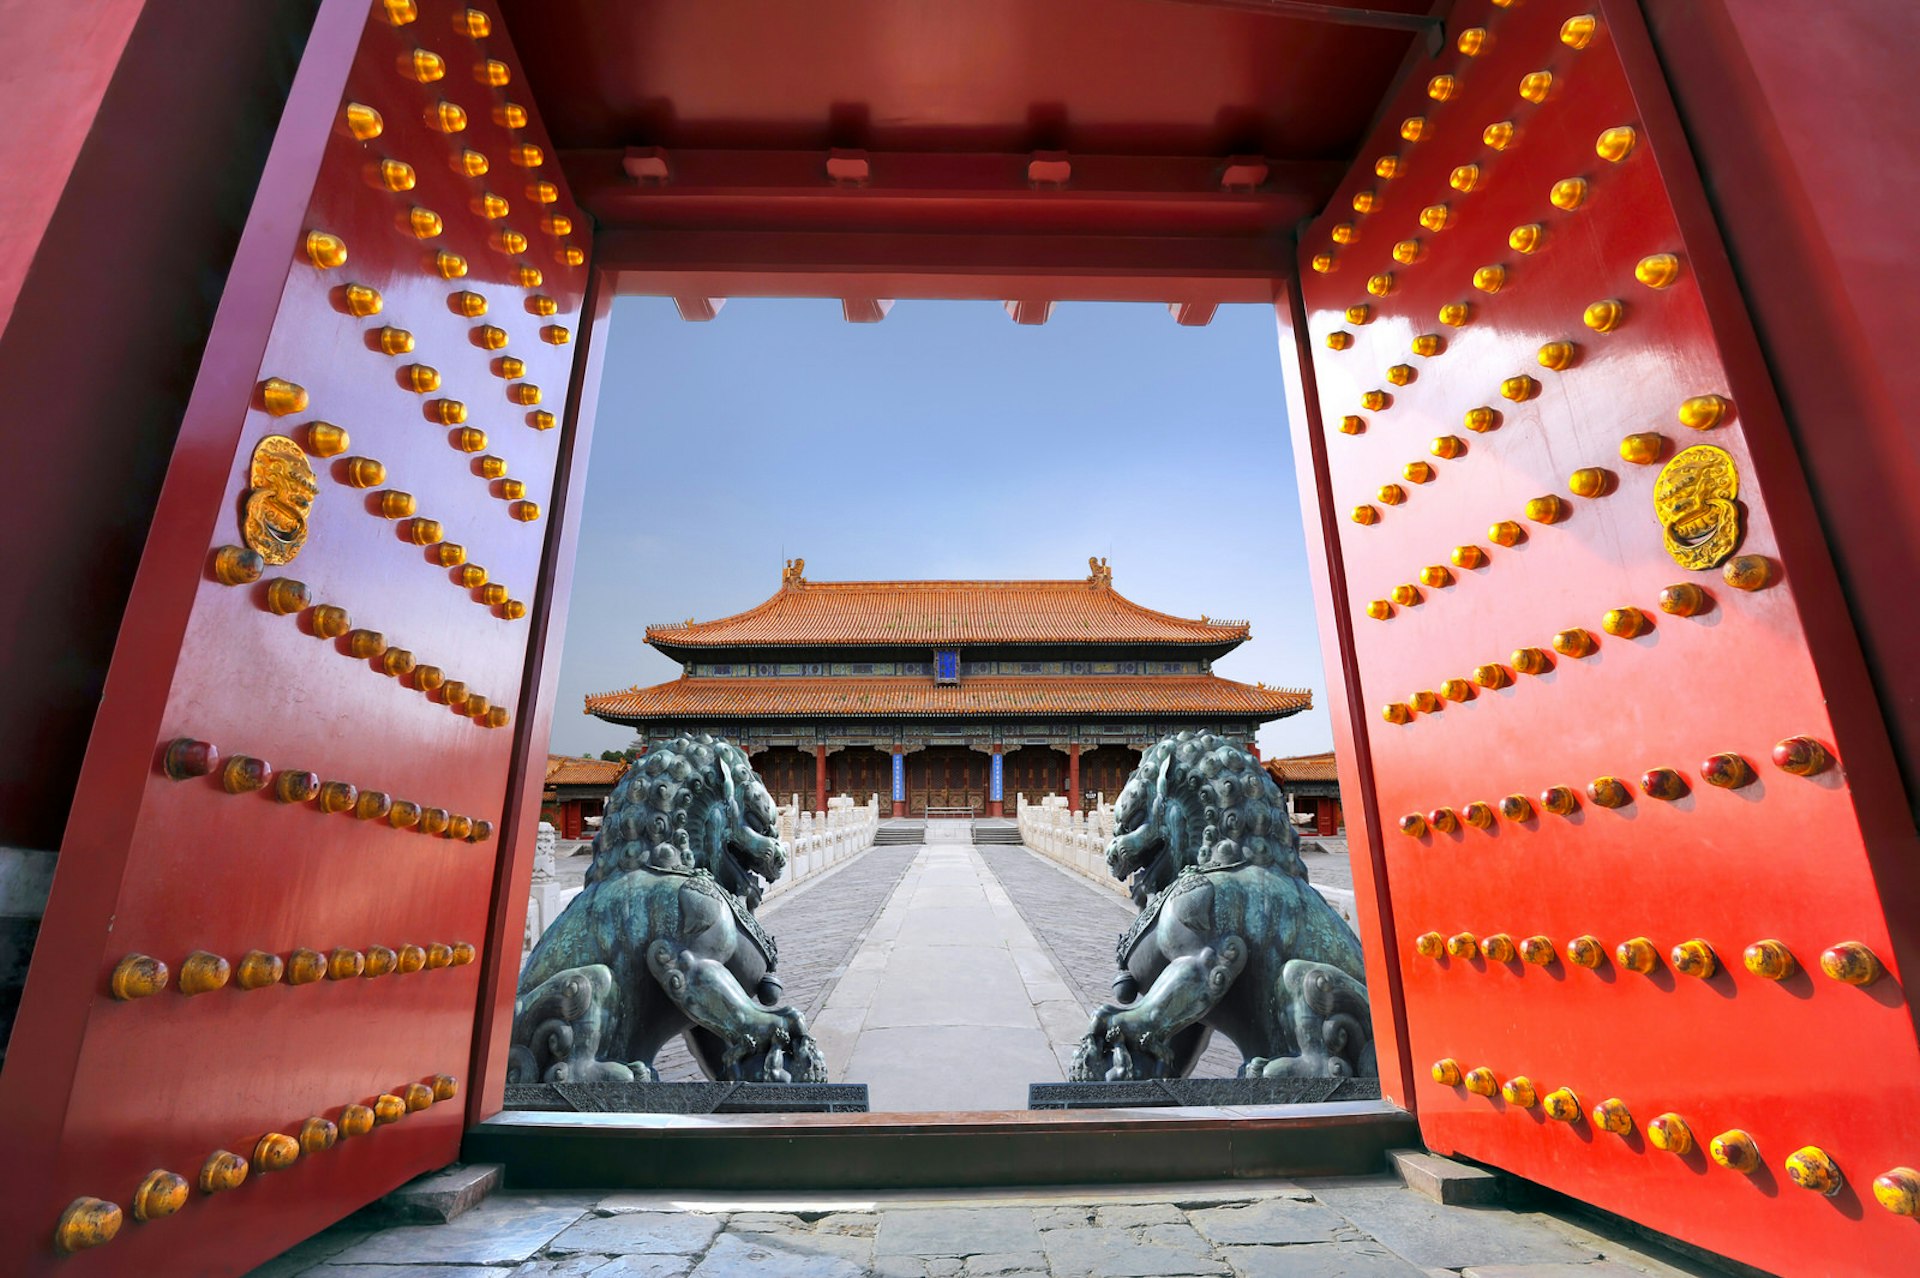 A red gate of the Forbidden City, Beijing, China